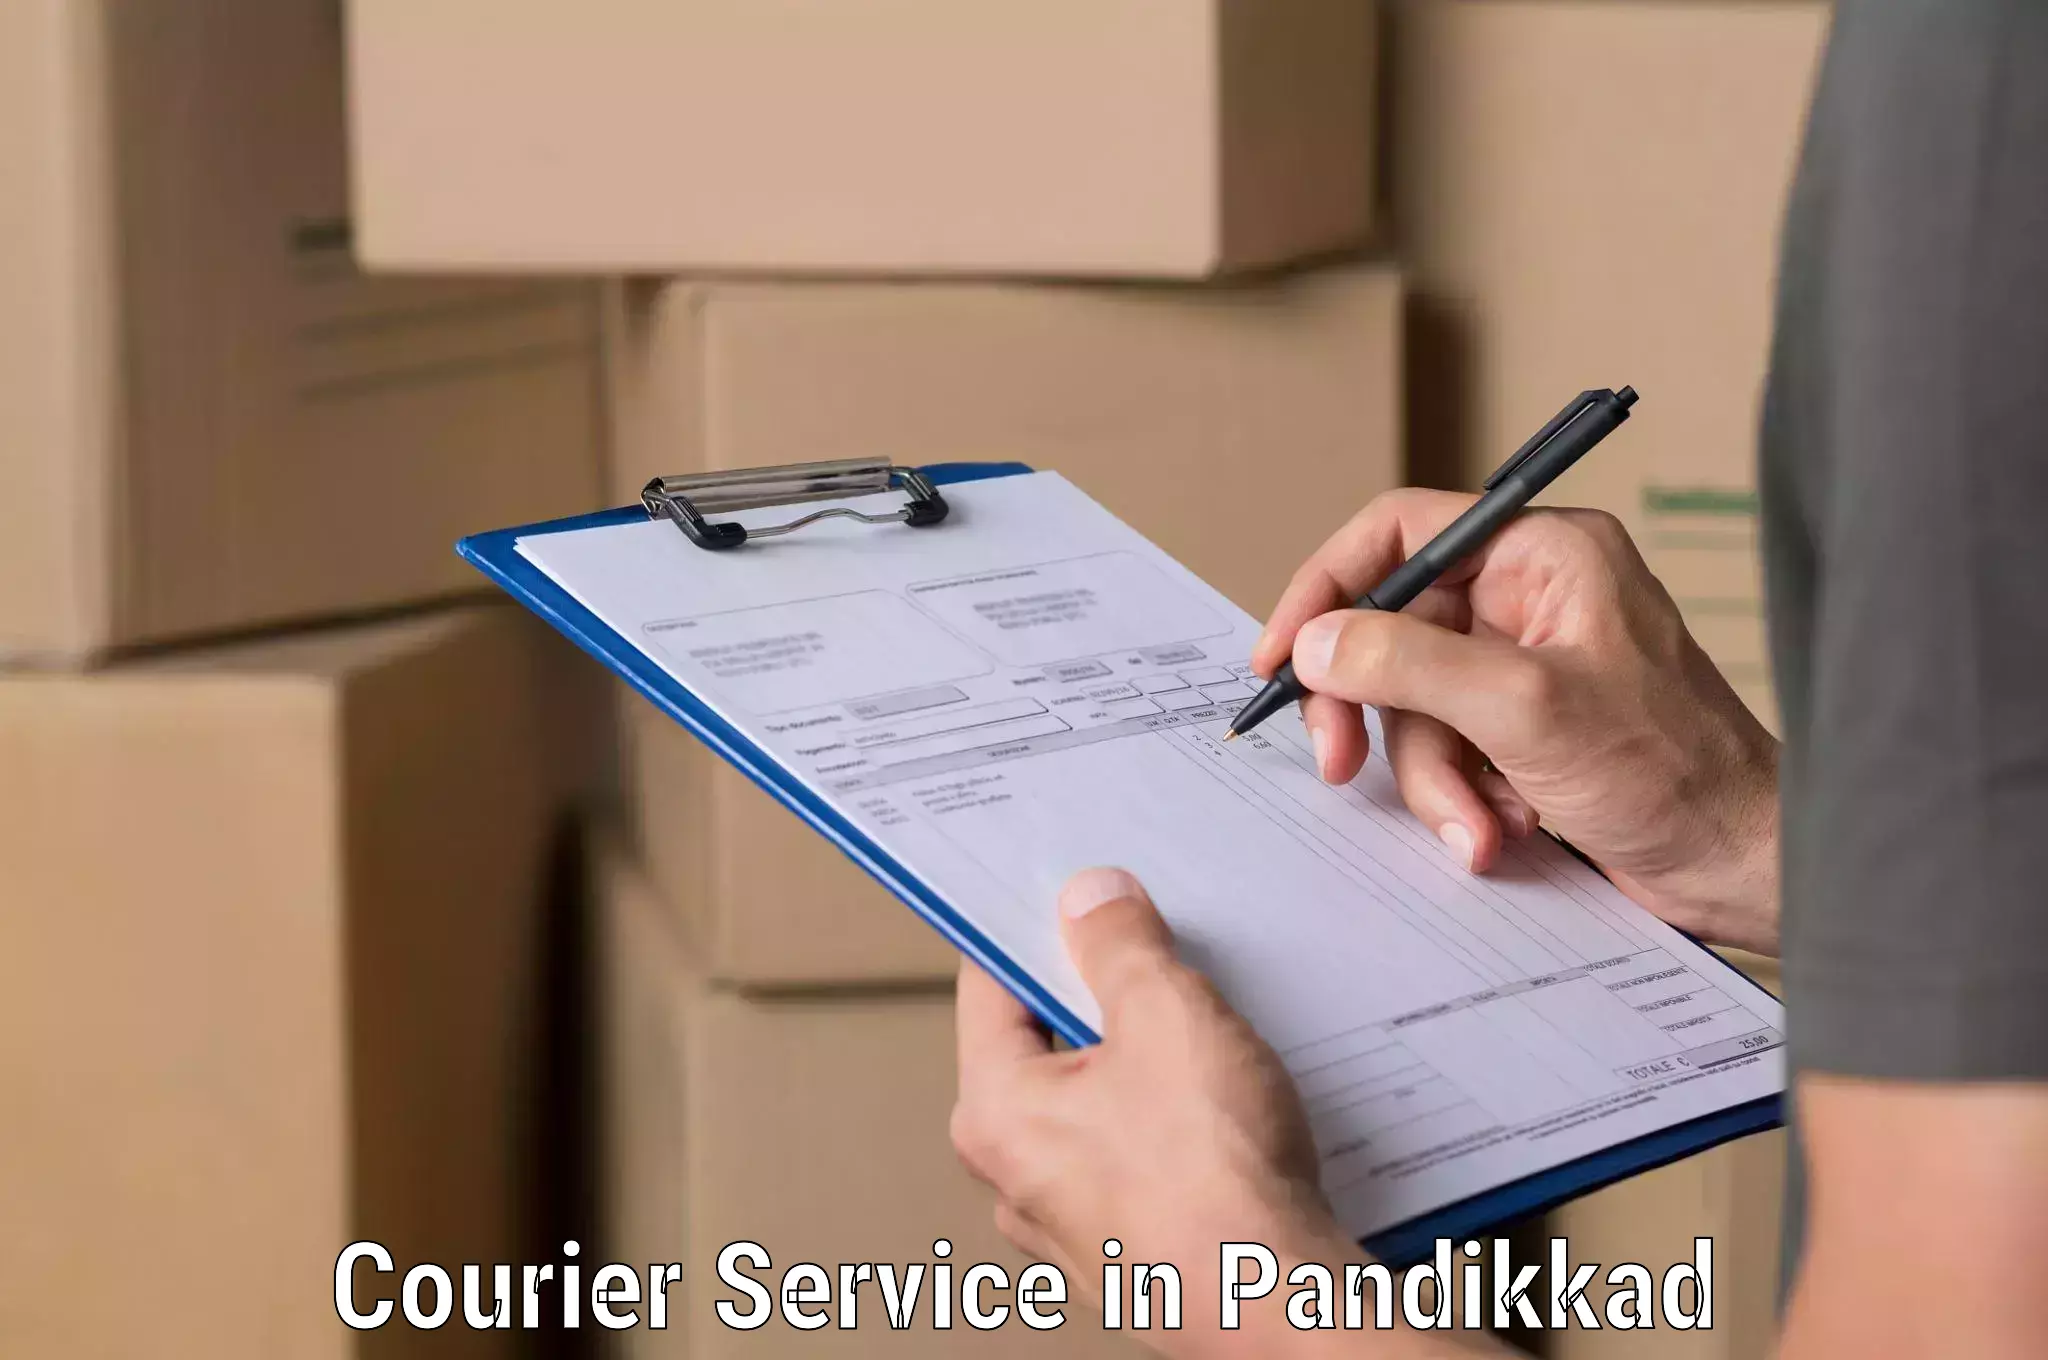 Automated parcel services in Pandikkad